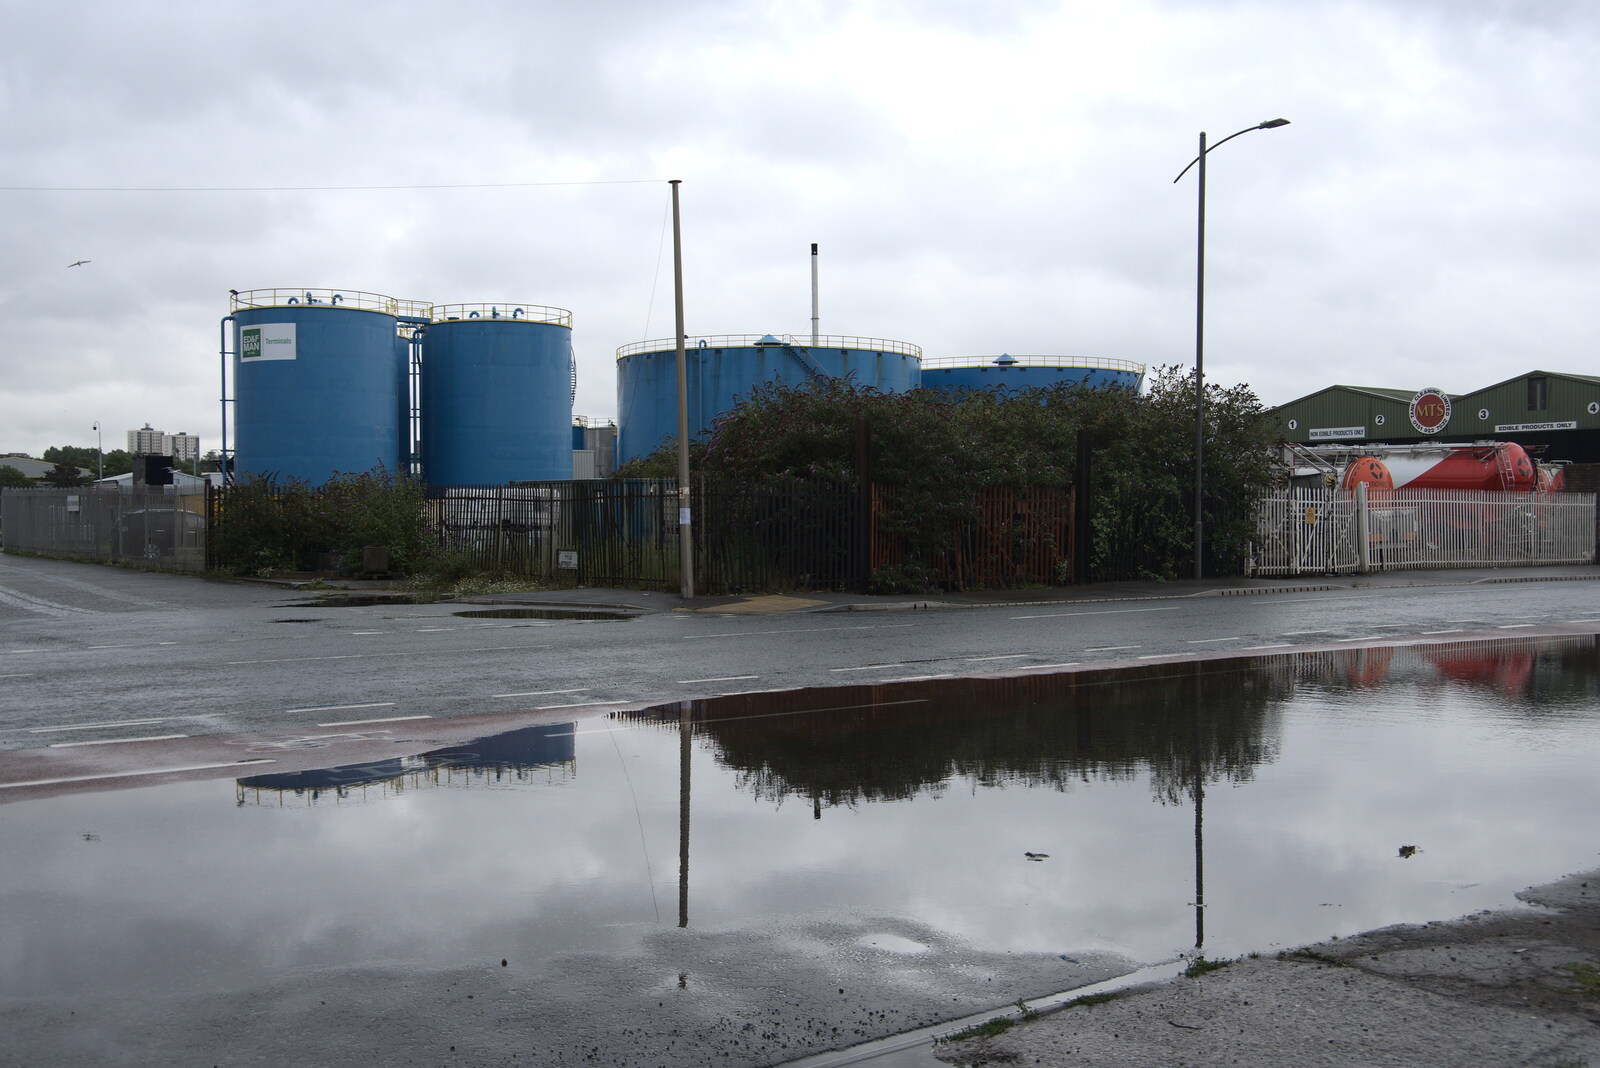 Standing water and tanks from Pork Pies and Dockside Dereliction, Melton Mowbray and Liverpool - 7th August 2021